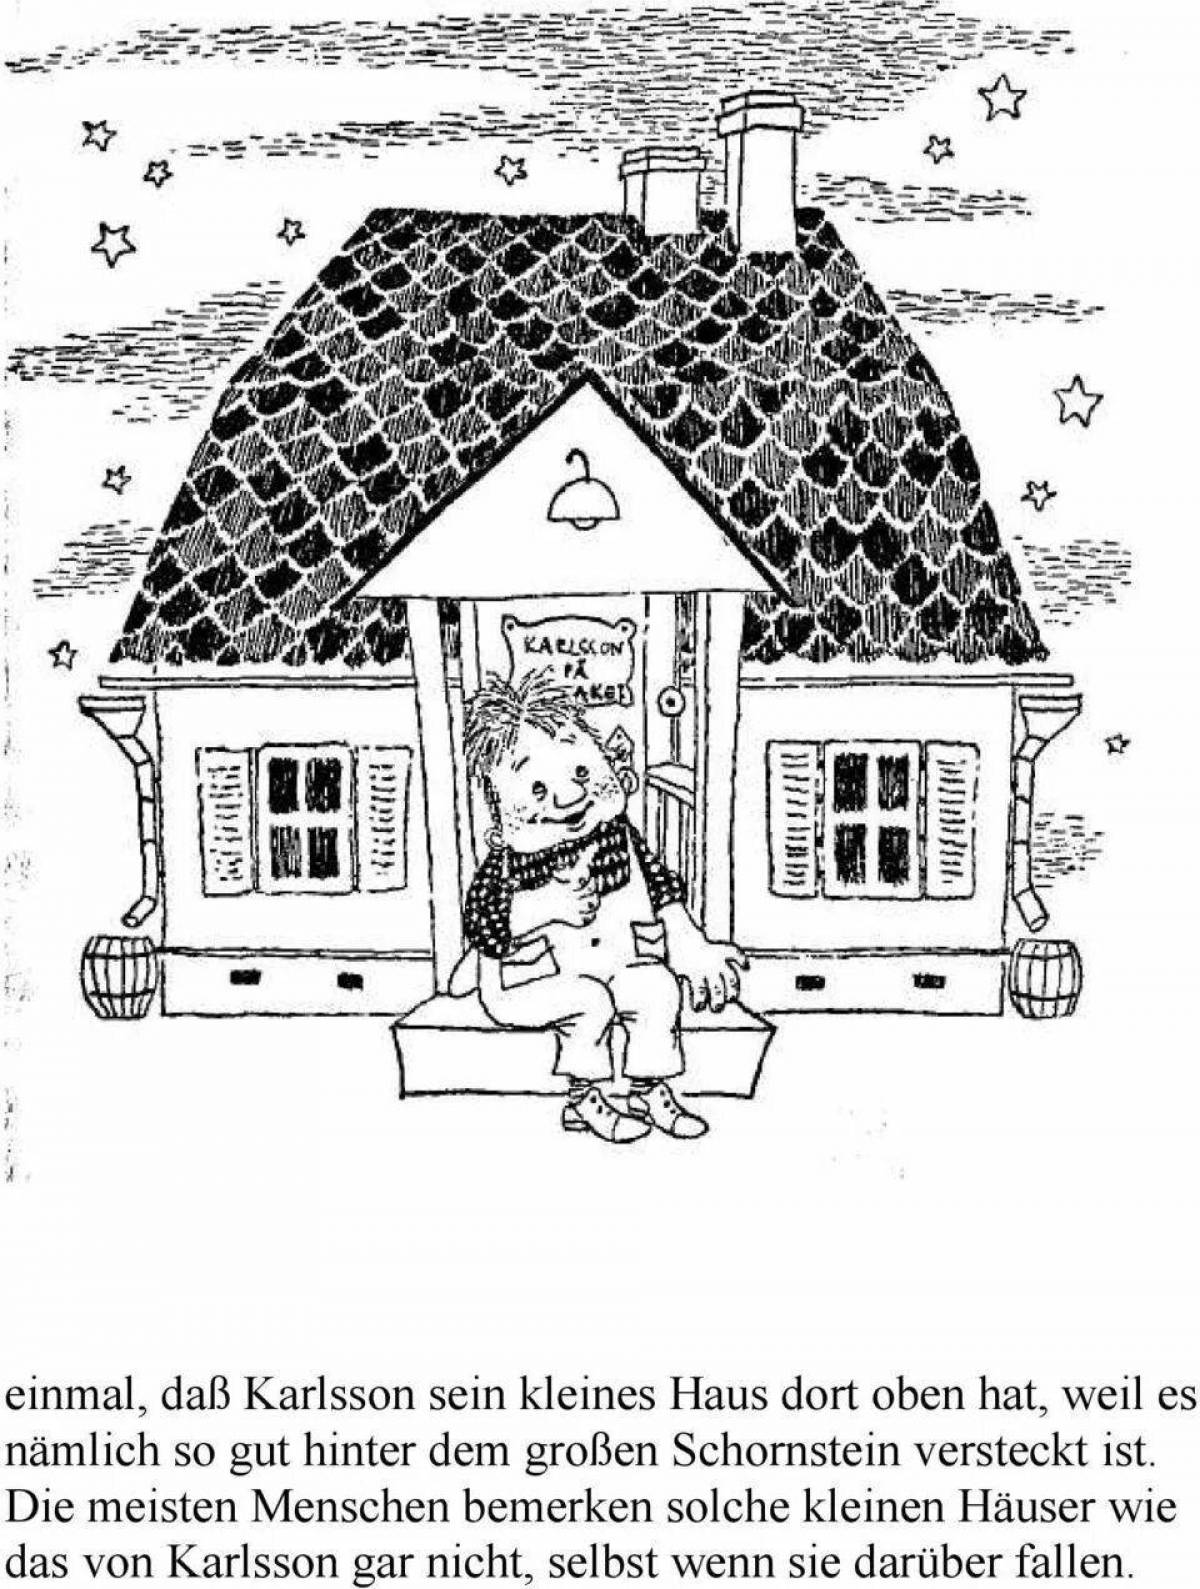 Coloring page for fearsome house roof